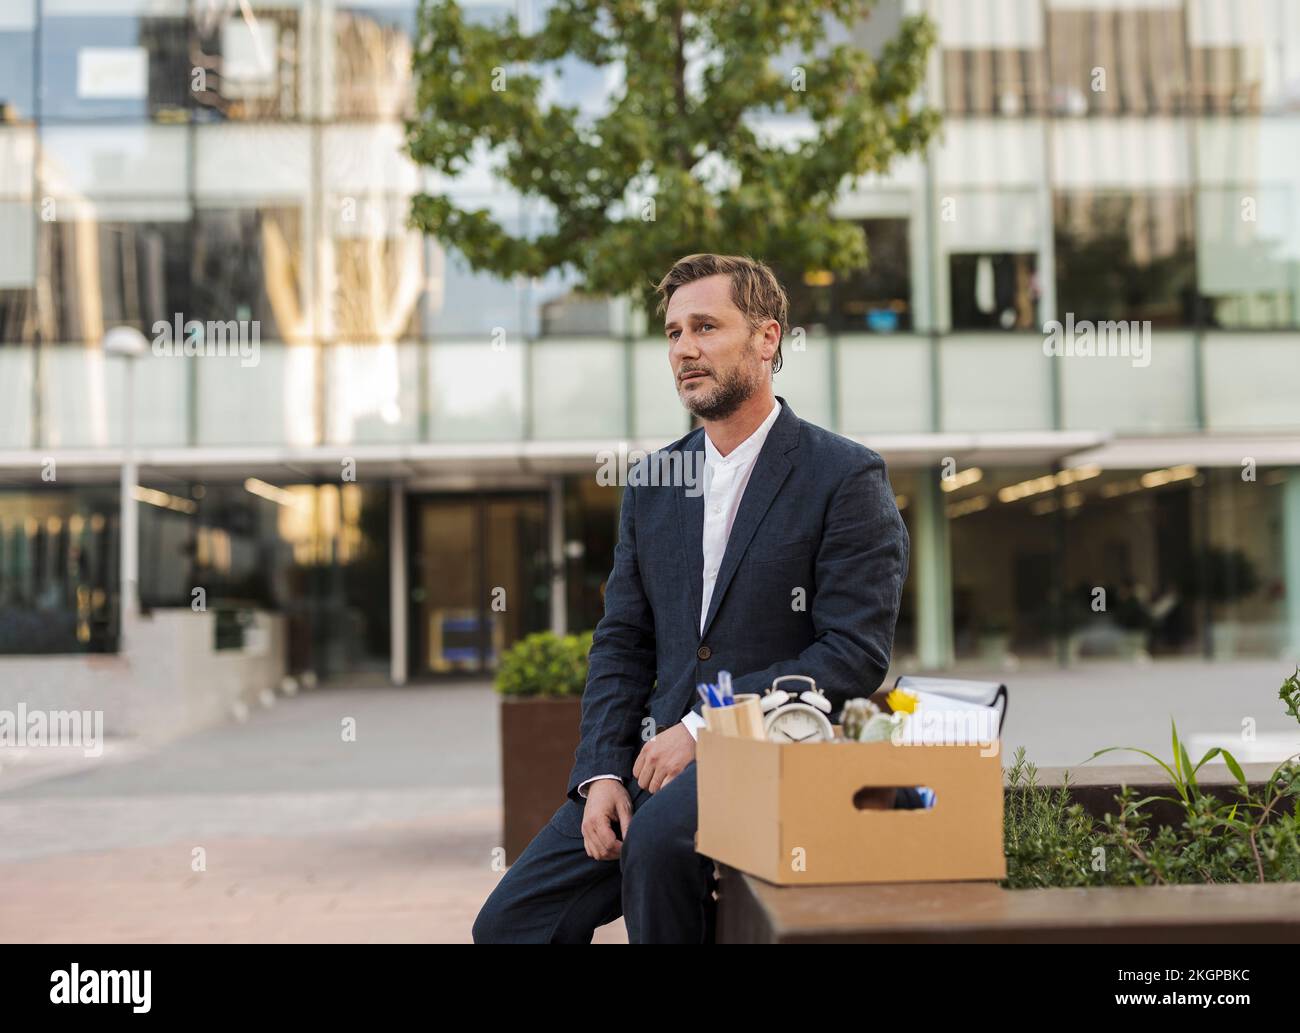 Sad businessman sitting with cardboard box outside office building Stock Photo